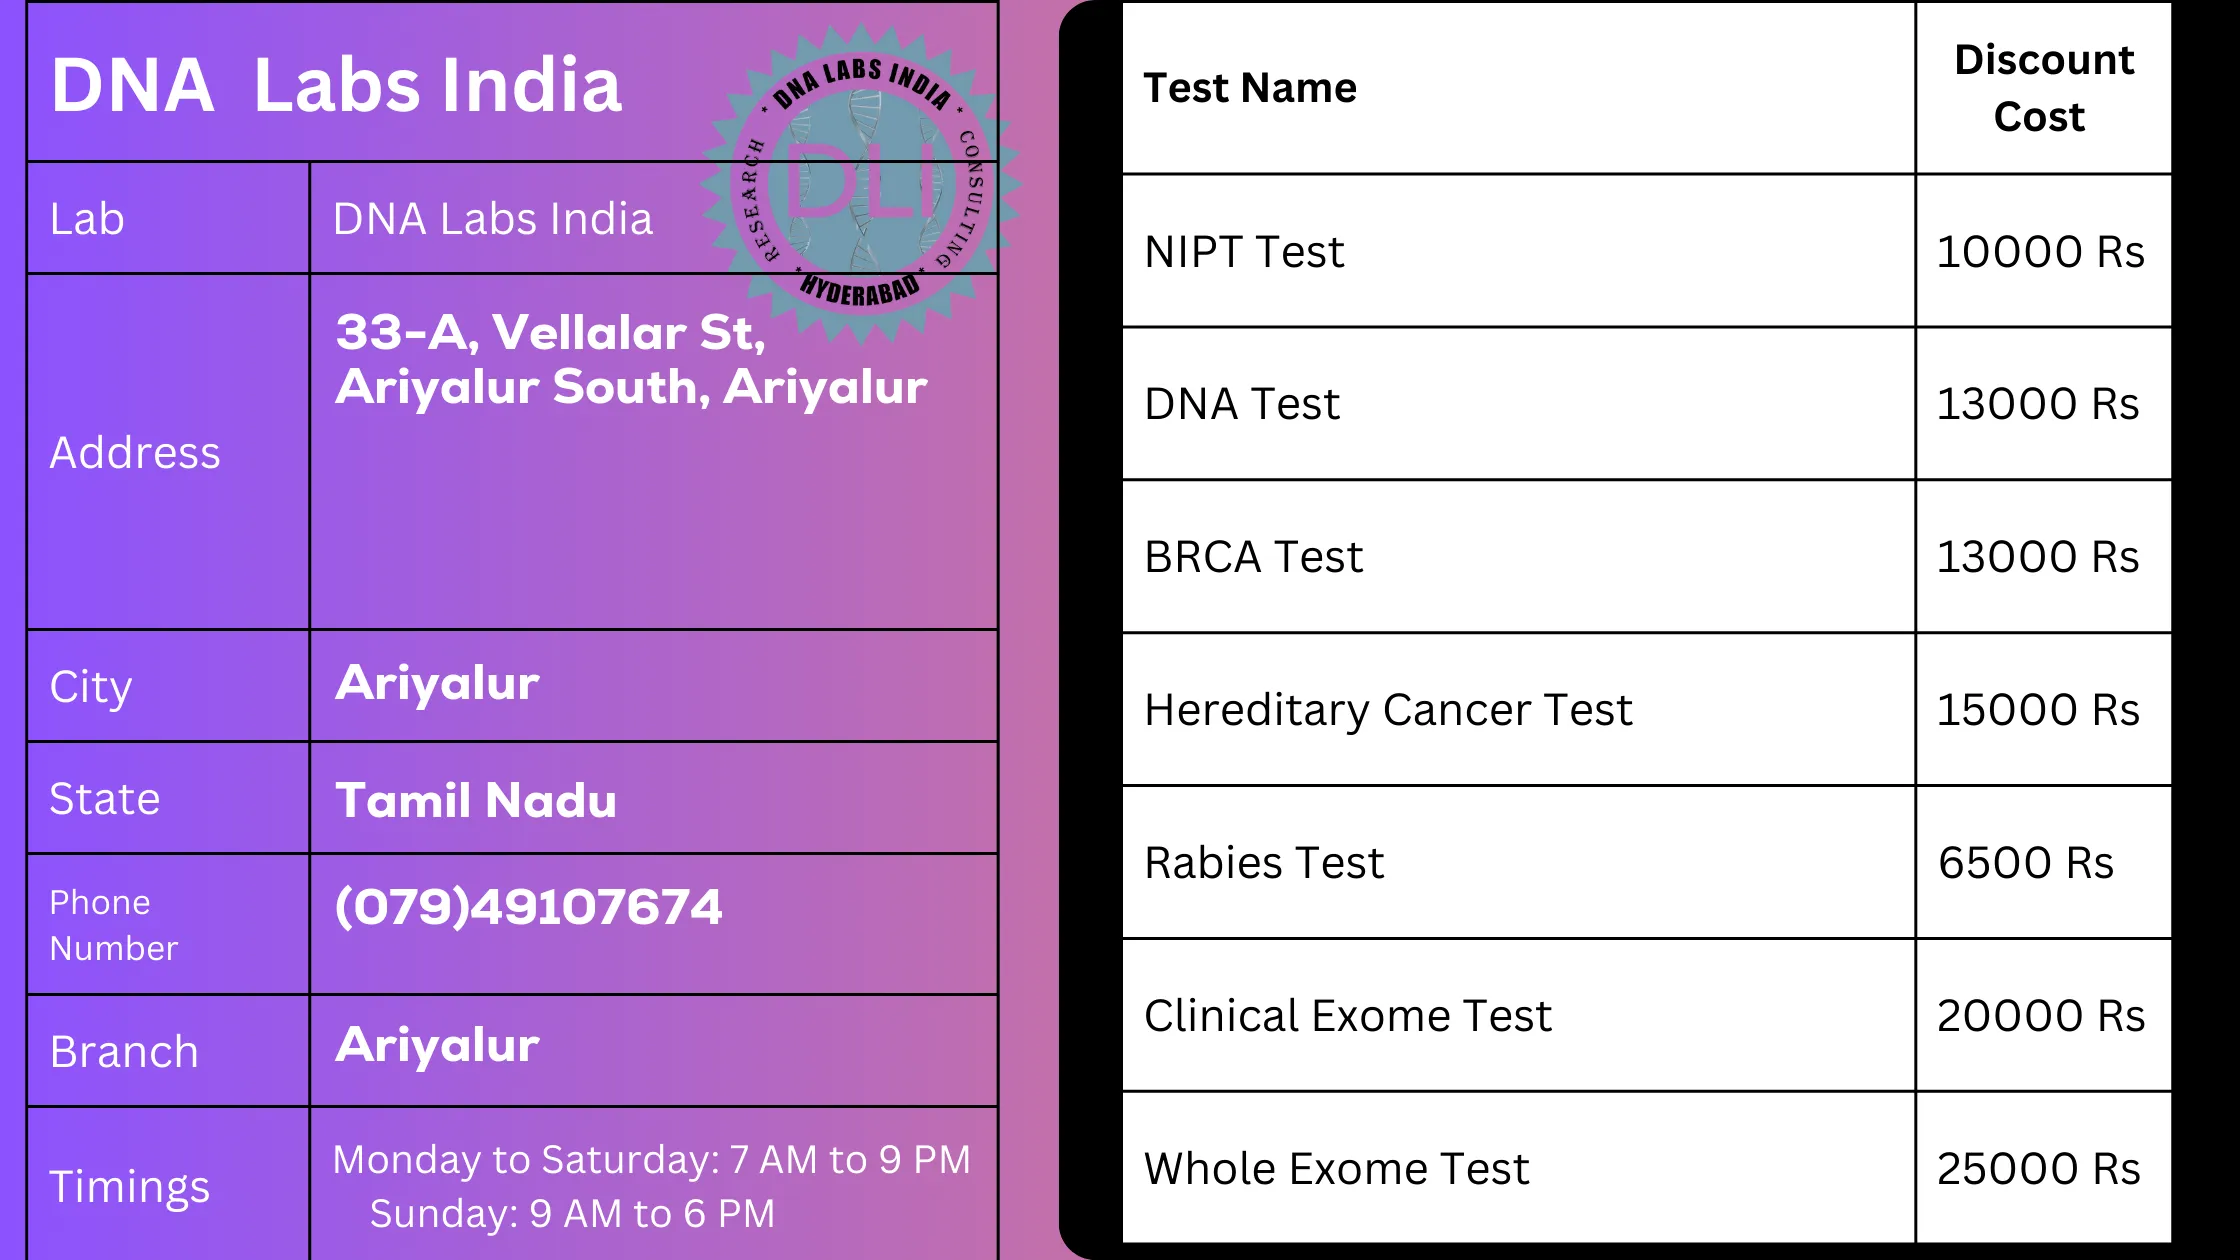 DNA Labs India in Ariyalur - Your Trusted Partner for Genetic Testing